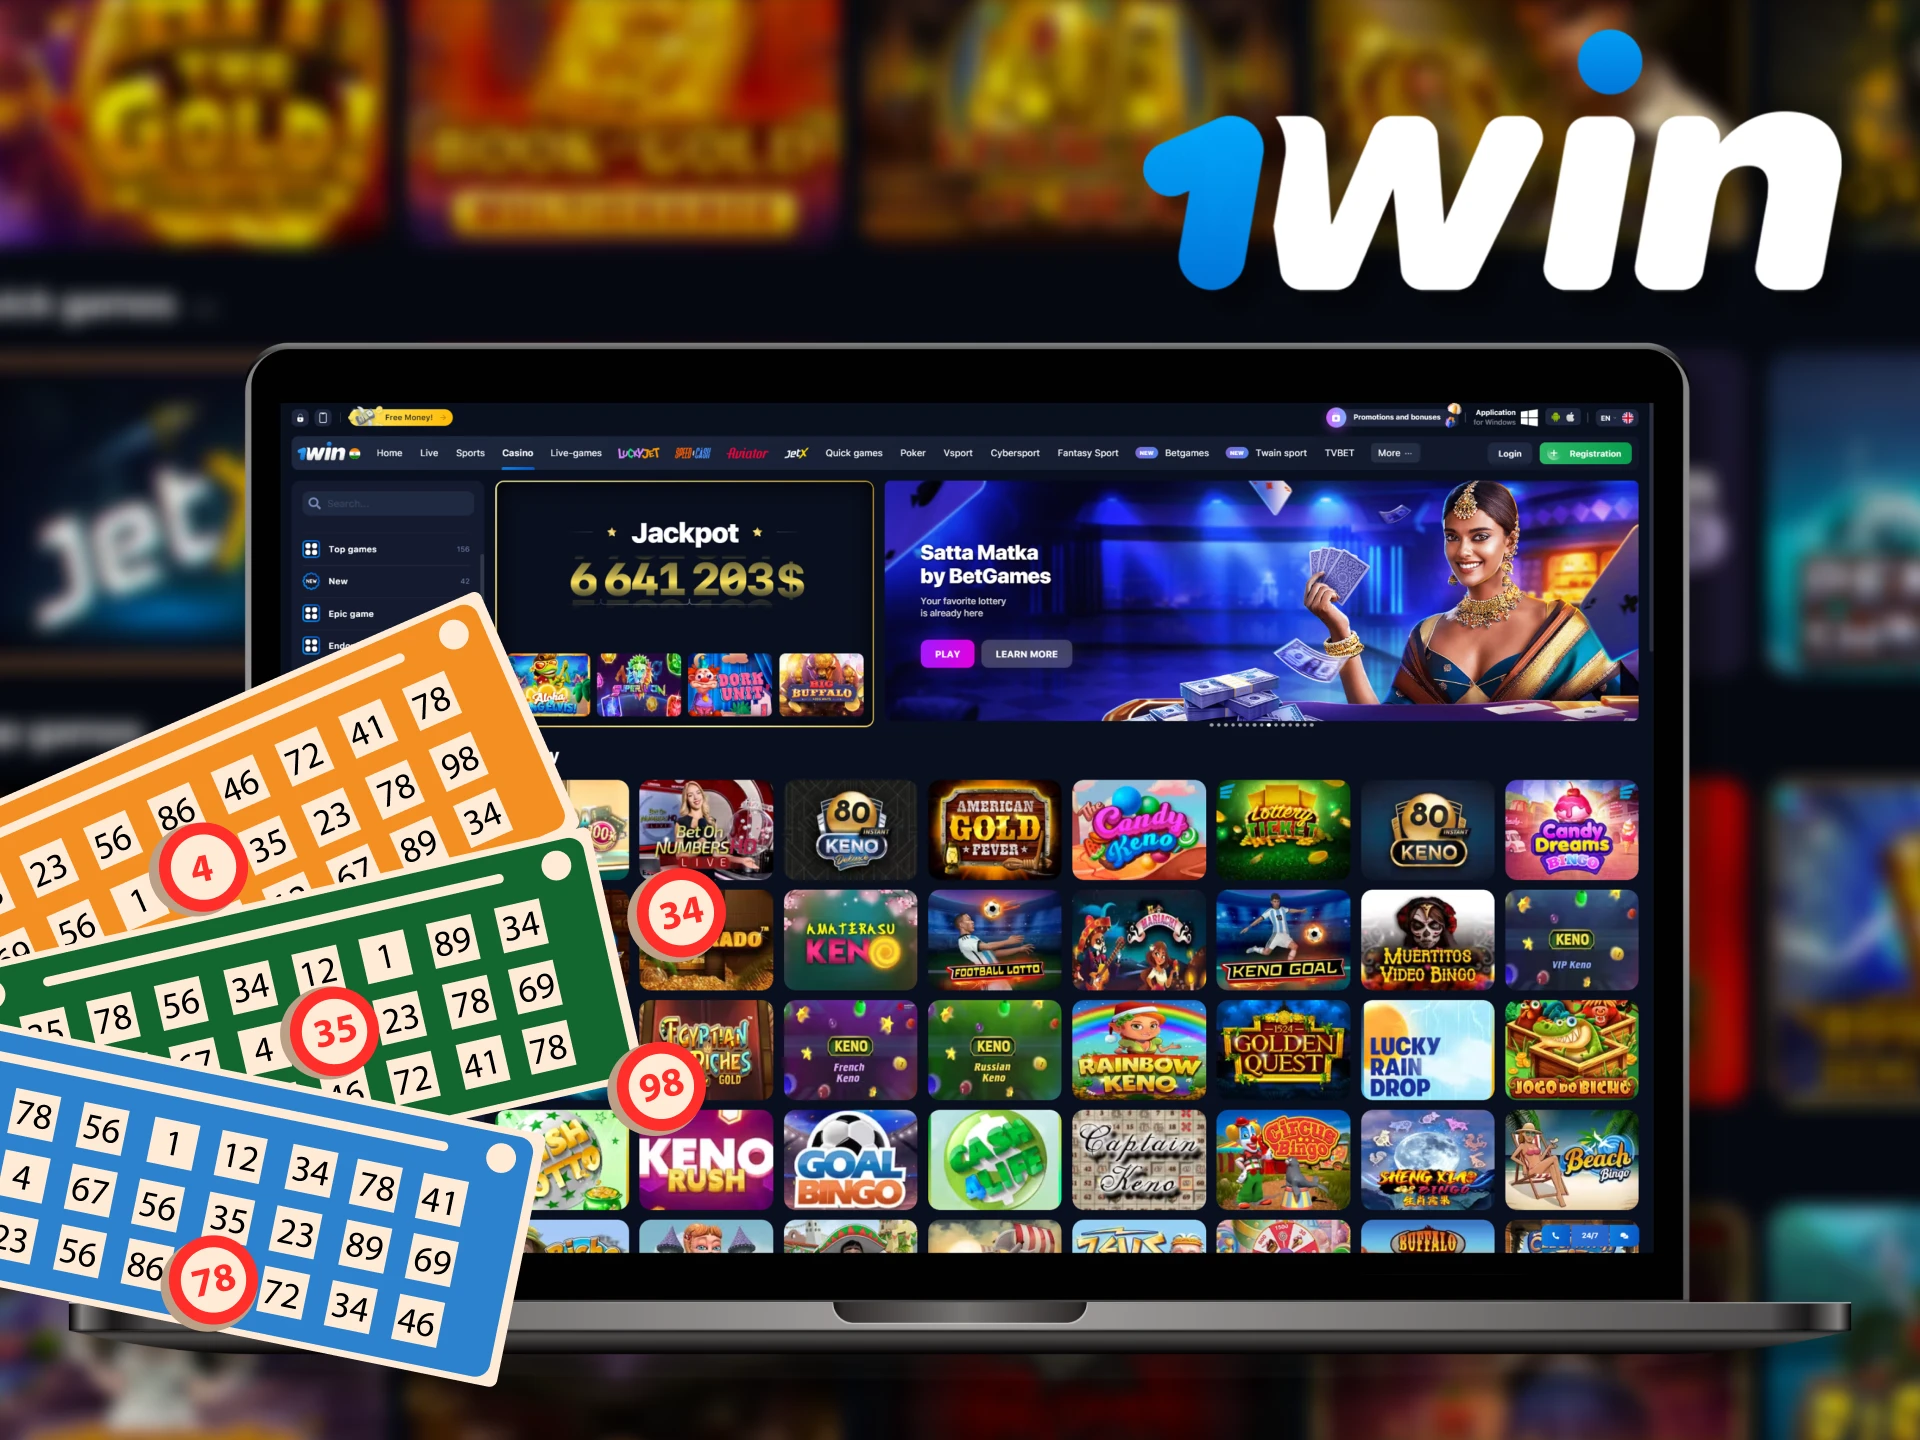 Play the most popular lotteries at 1win casino.